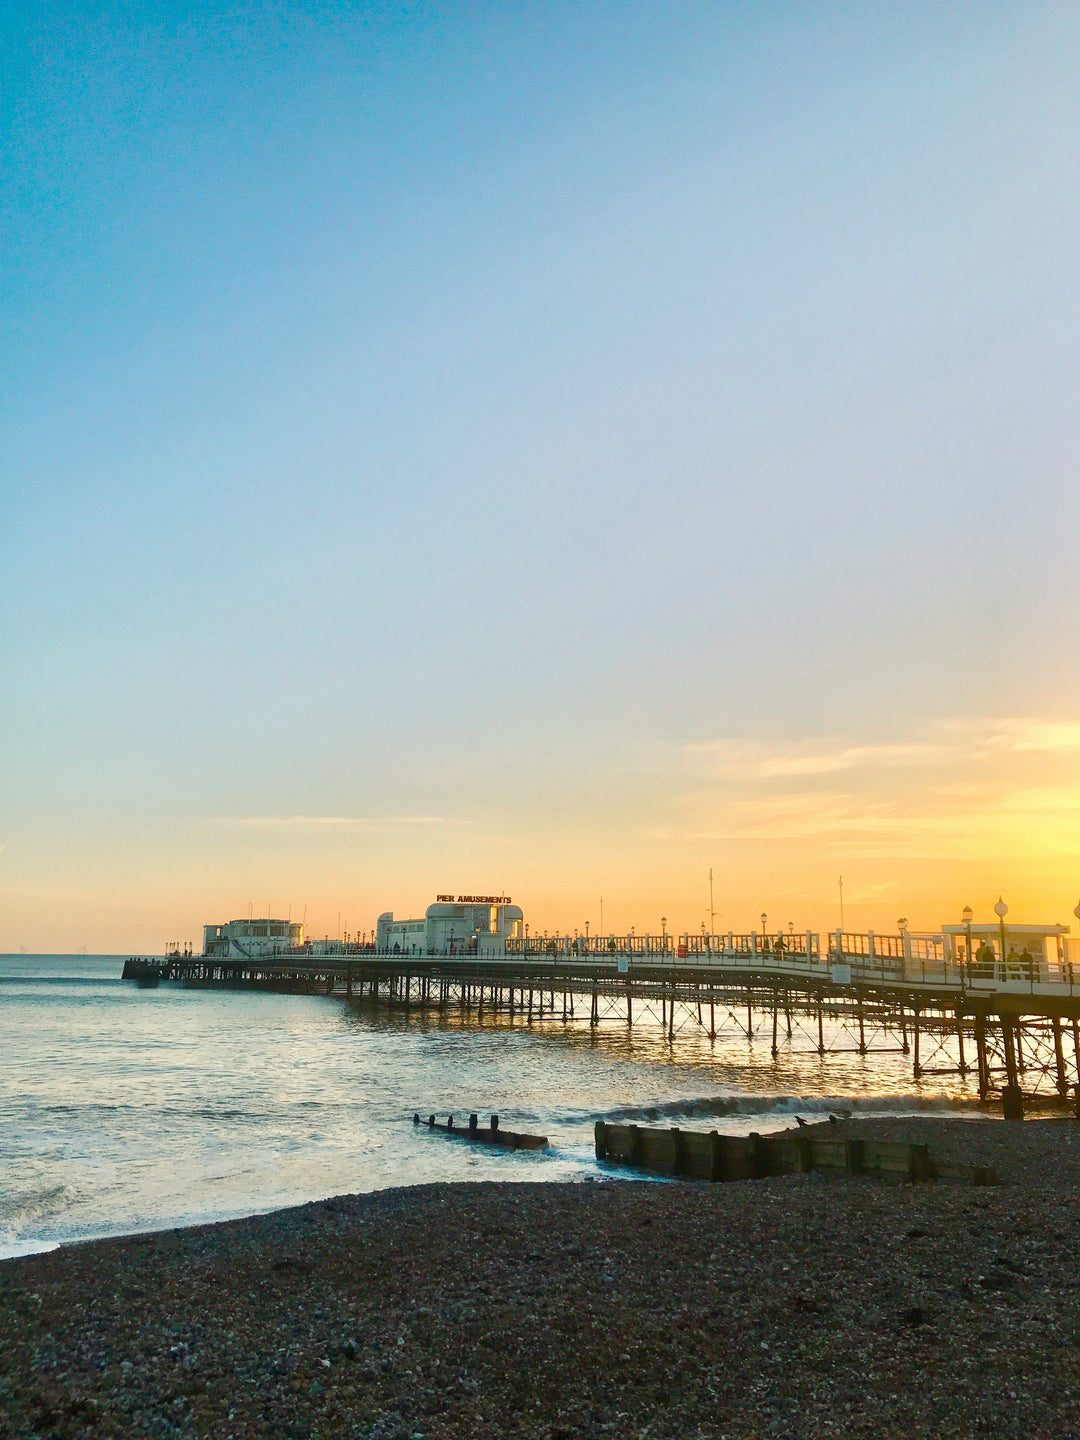 Worthing Pier West Sussex at sunset Photo Print - Canvas - Framed Photo Print - Hampshire Prints